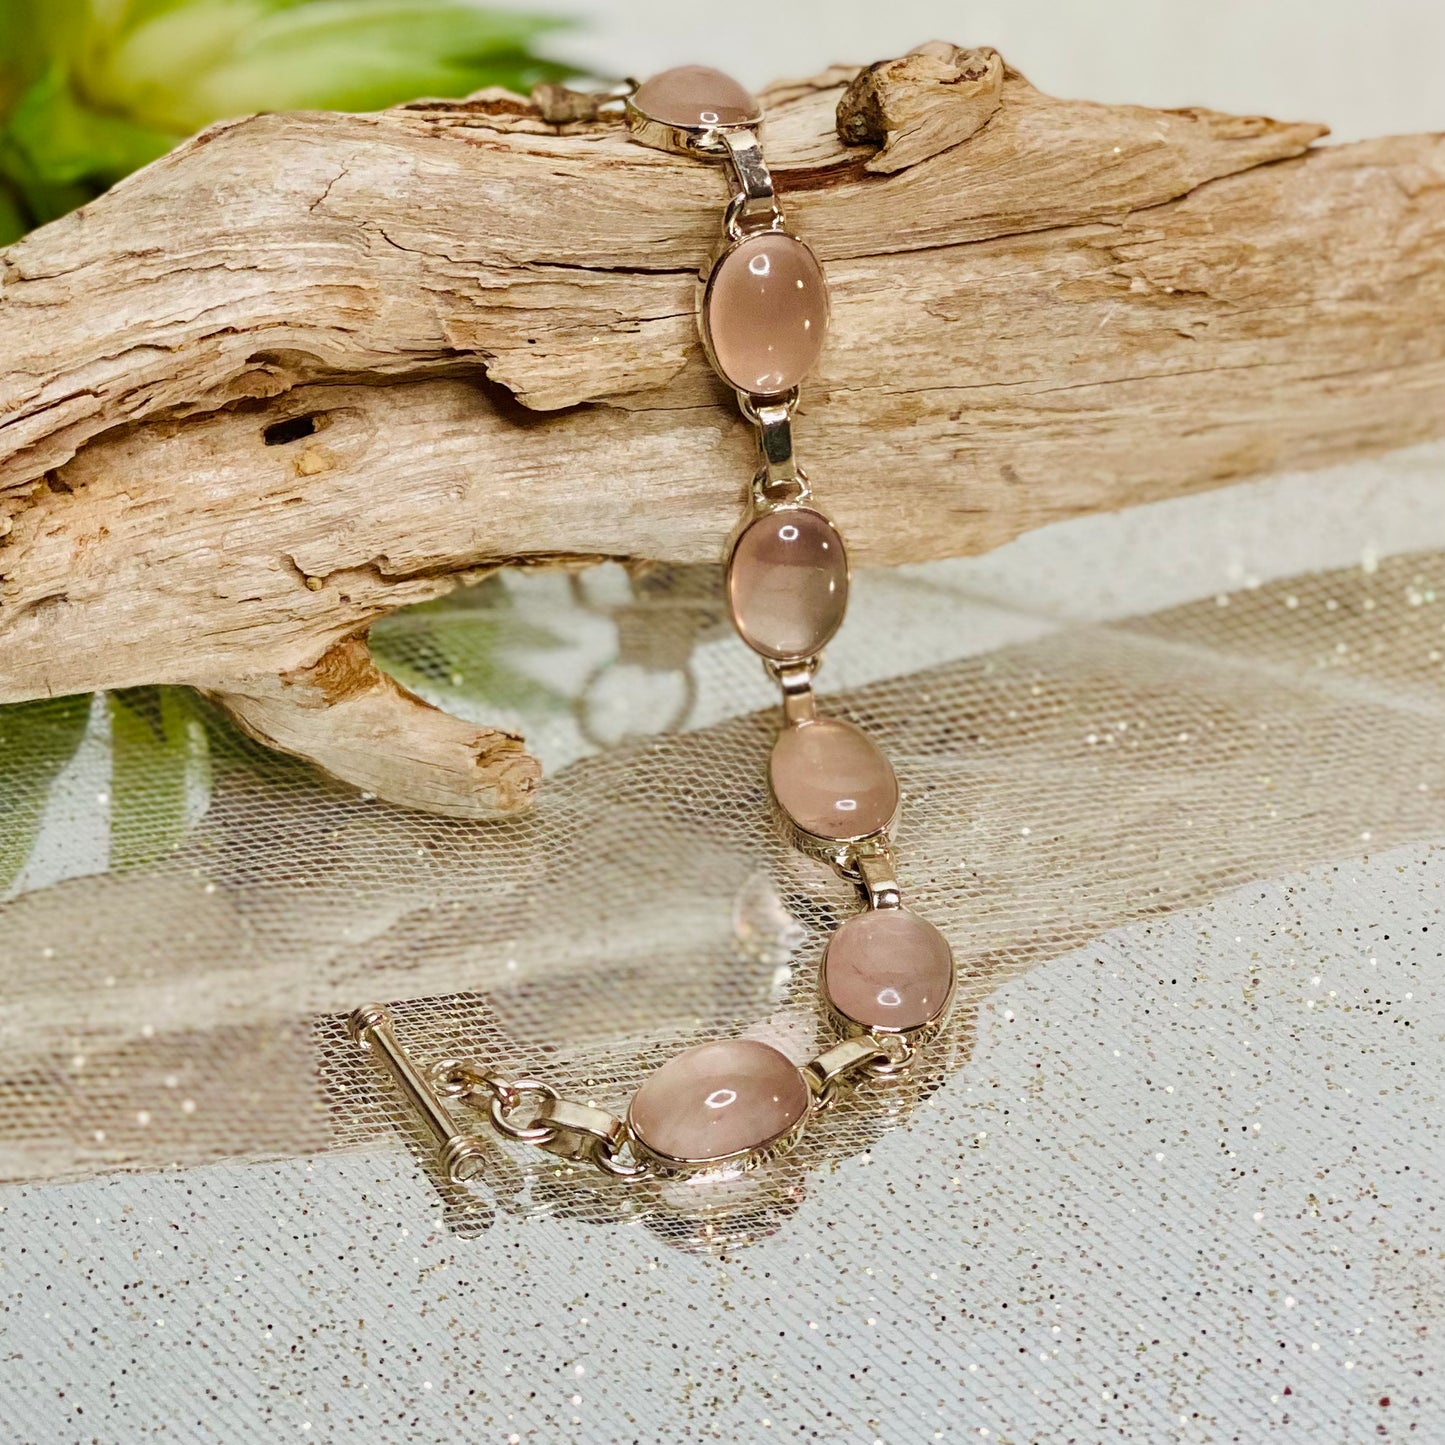 Rose Quartz Sterling Silver Bracelet with 6 Cabochons and Toggle Clasp